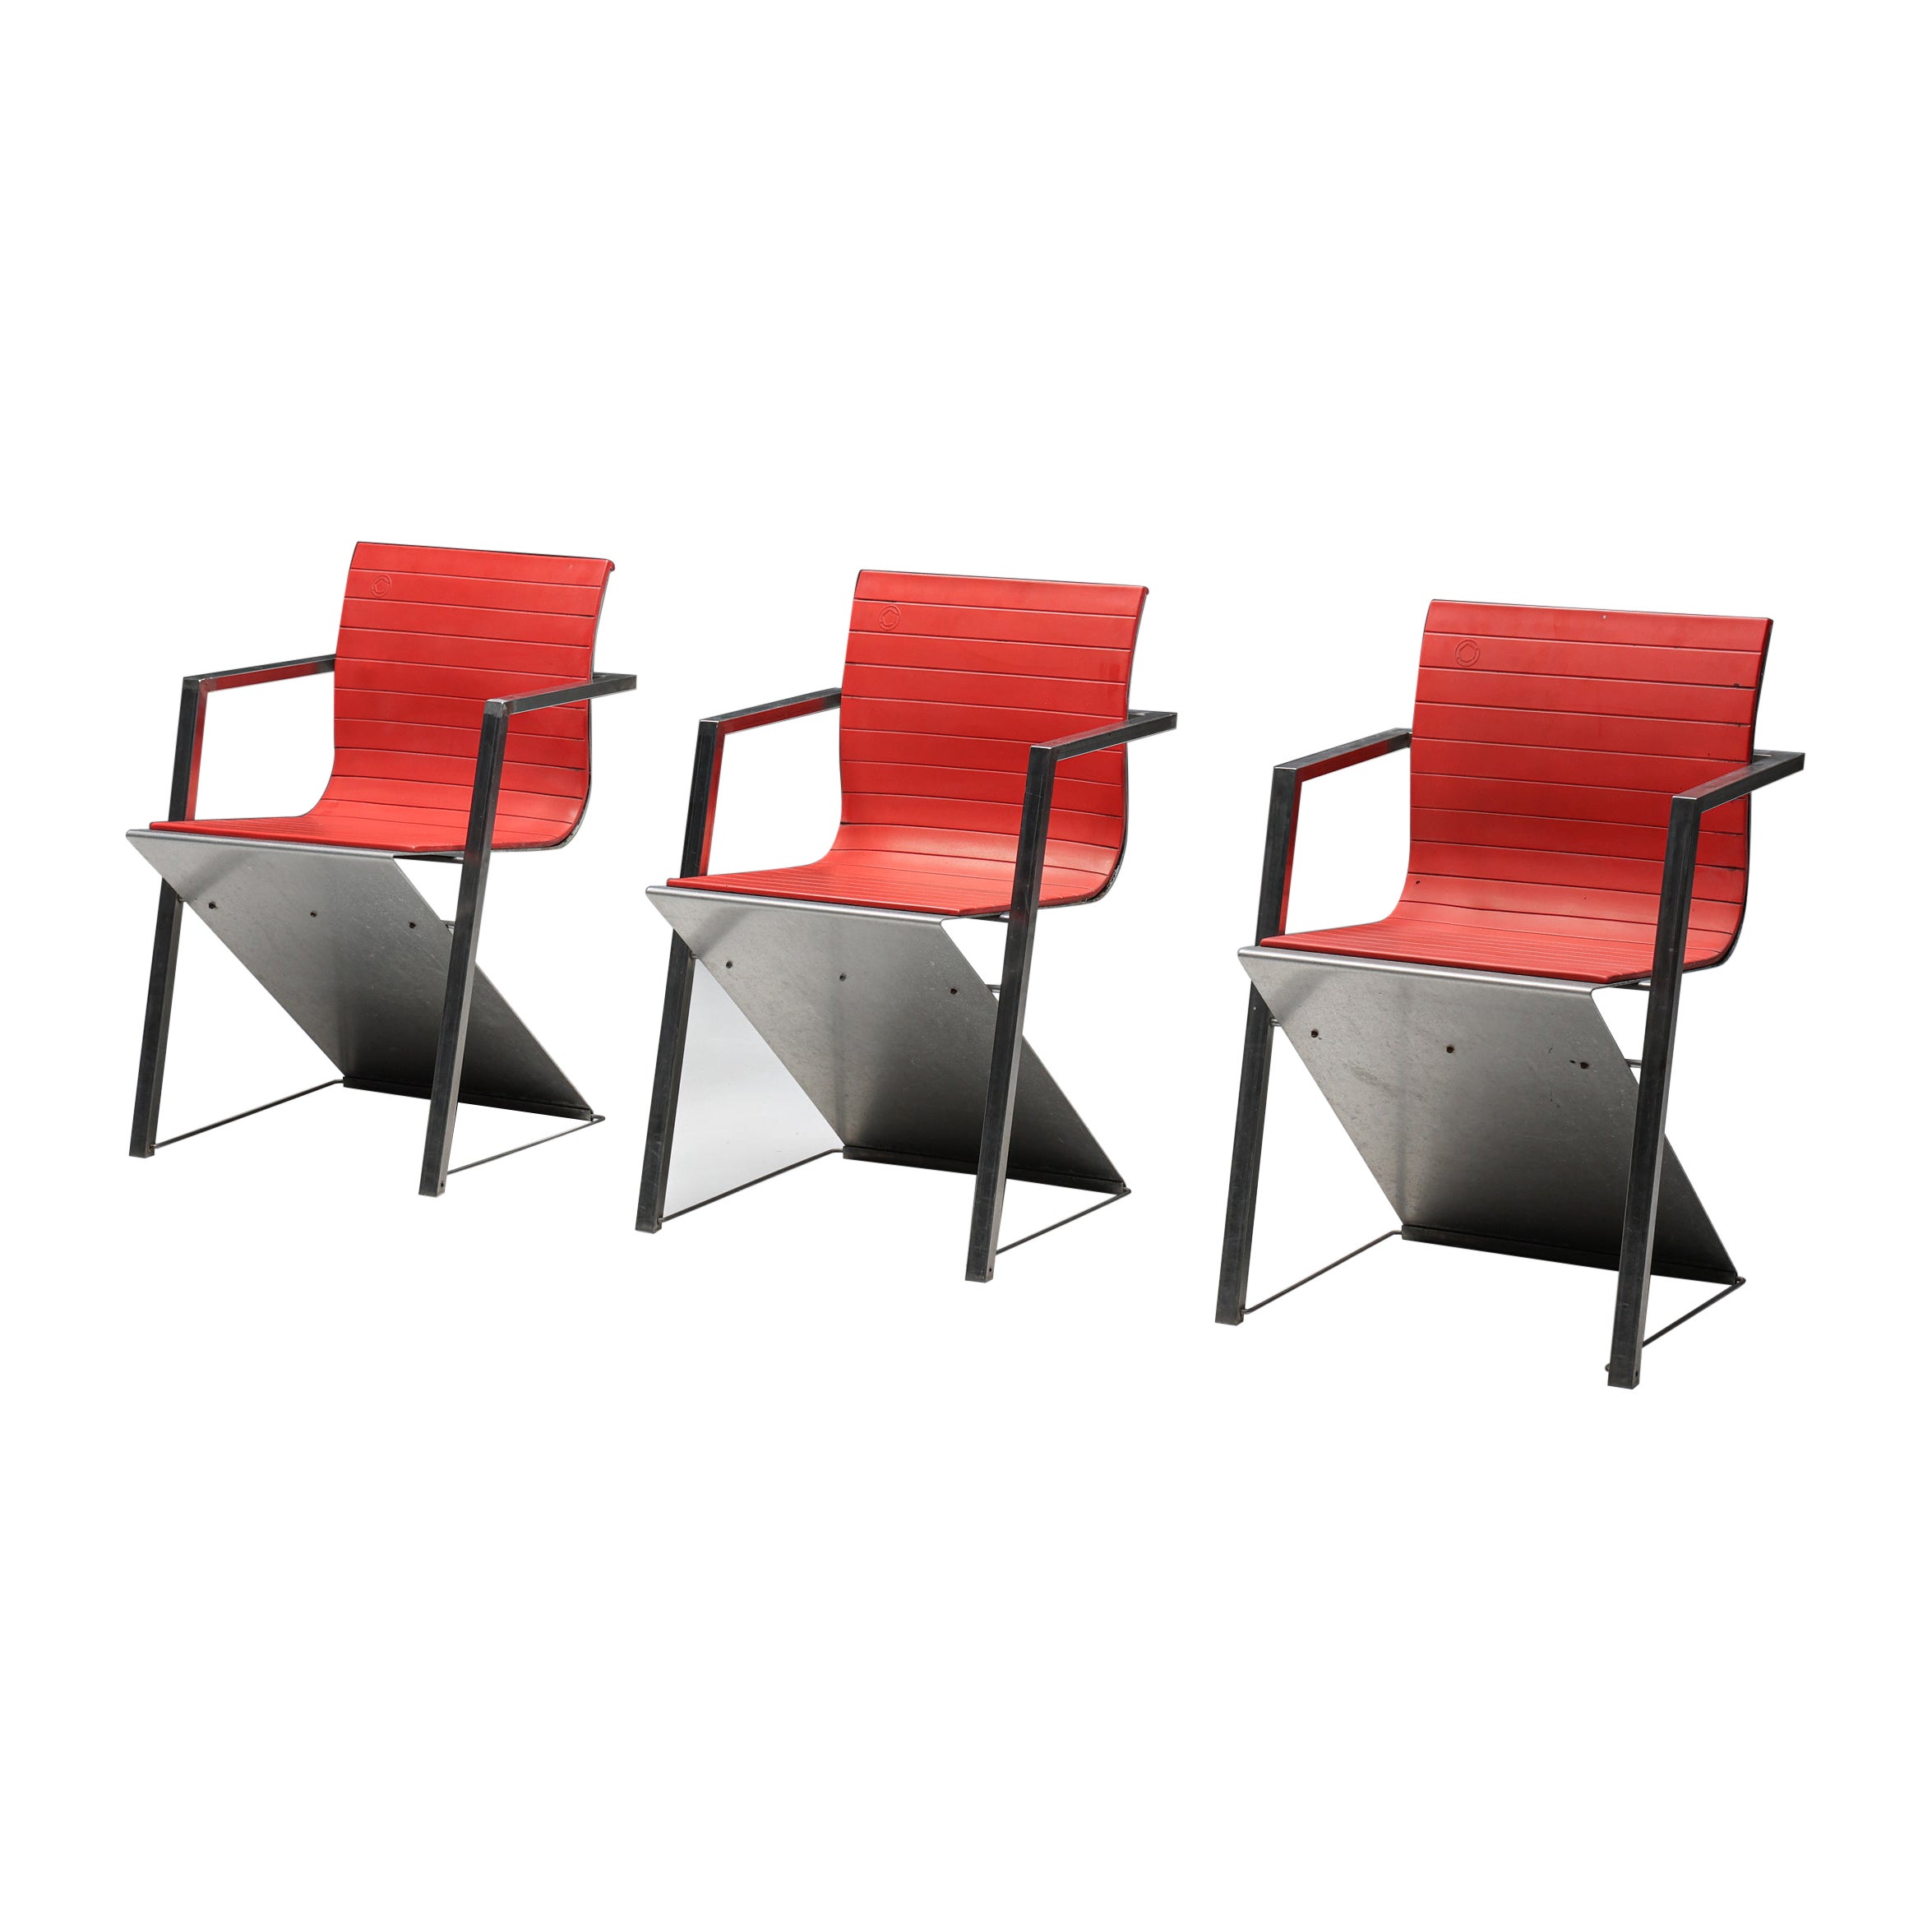 Pentagon Group Casino Model ‘d8’ Red Chairs, Germany, 1987